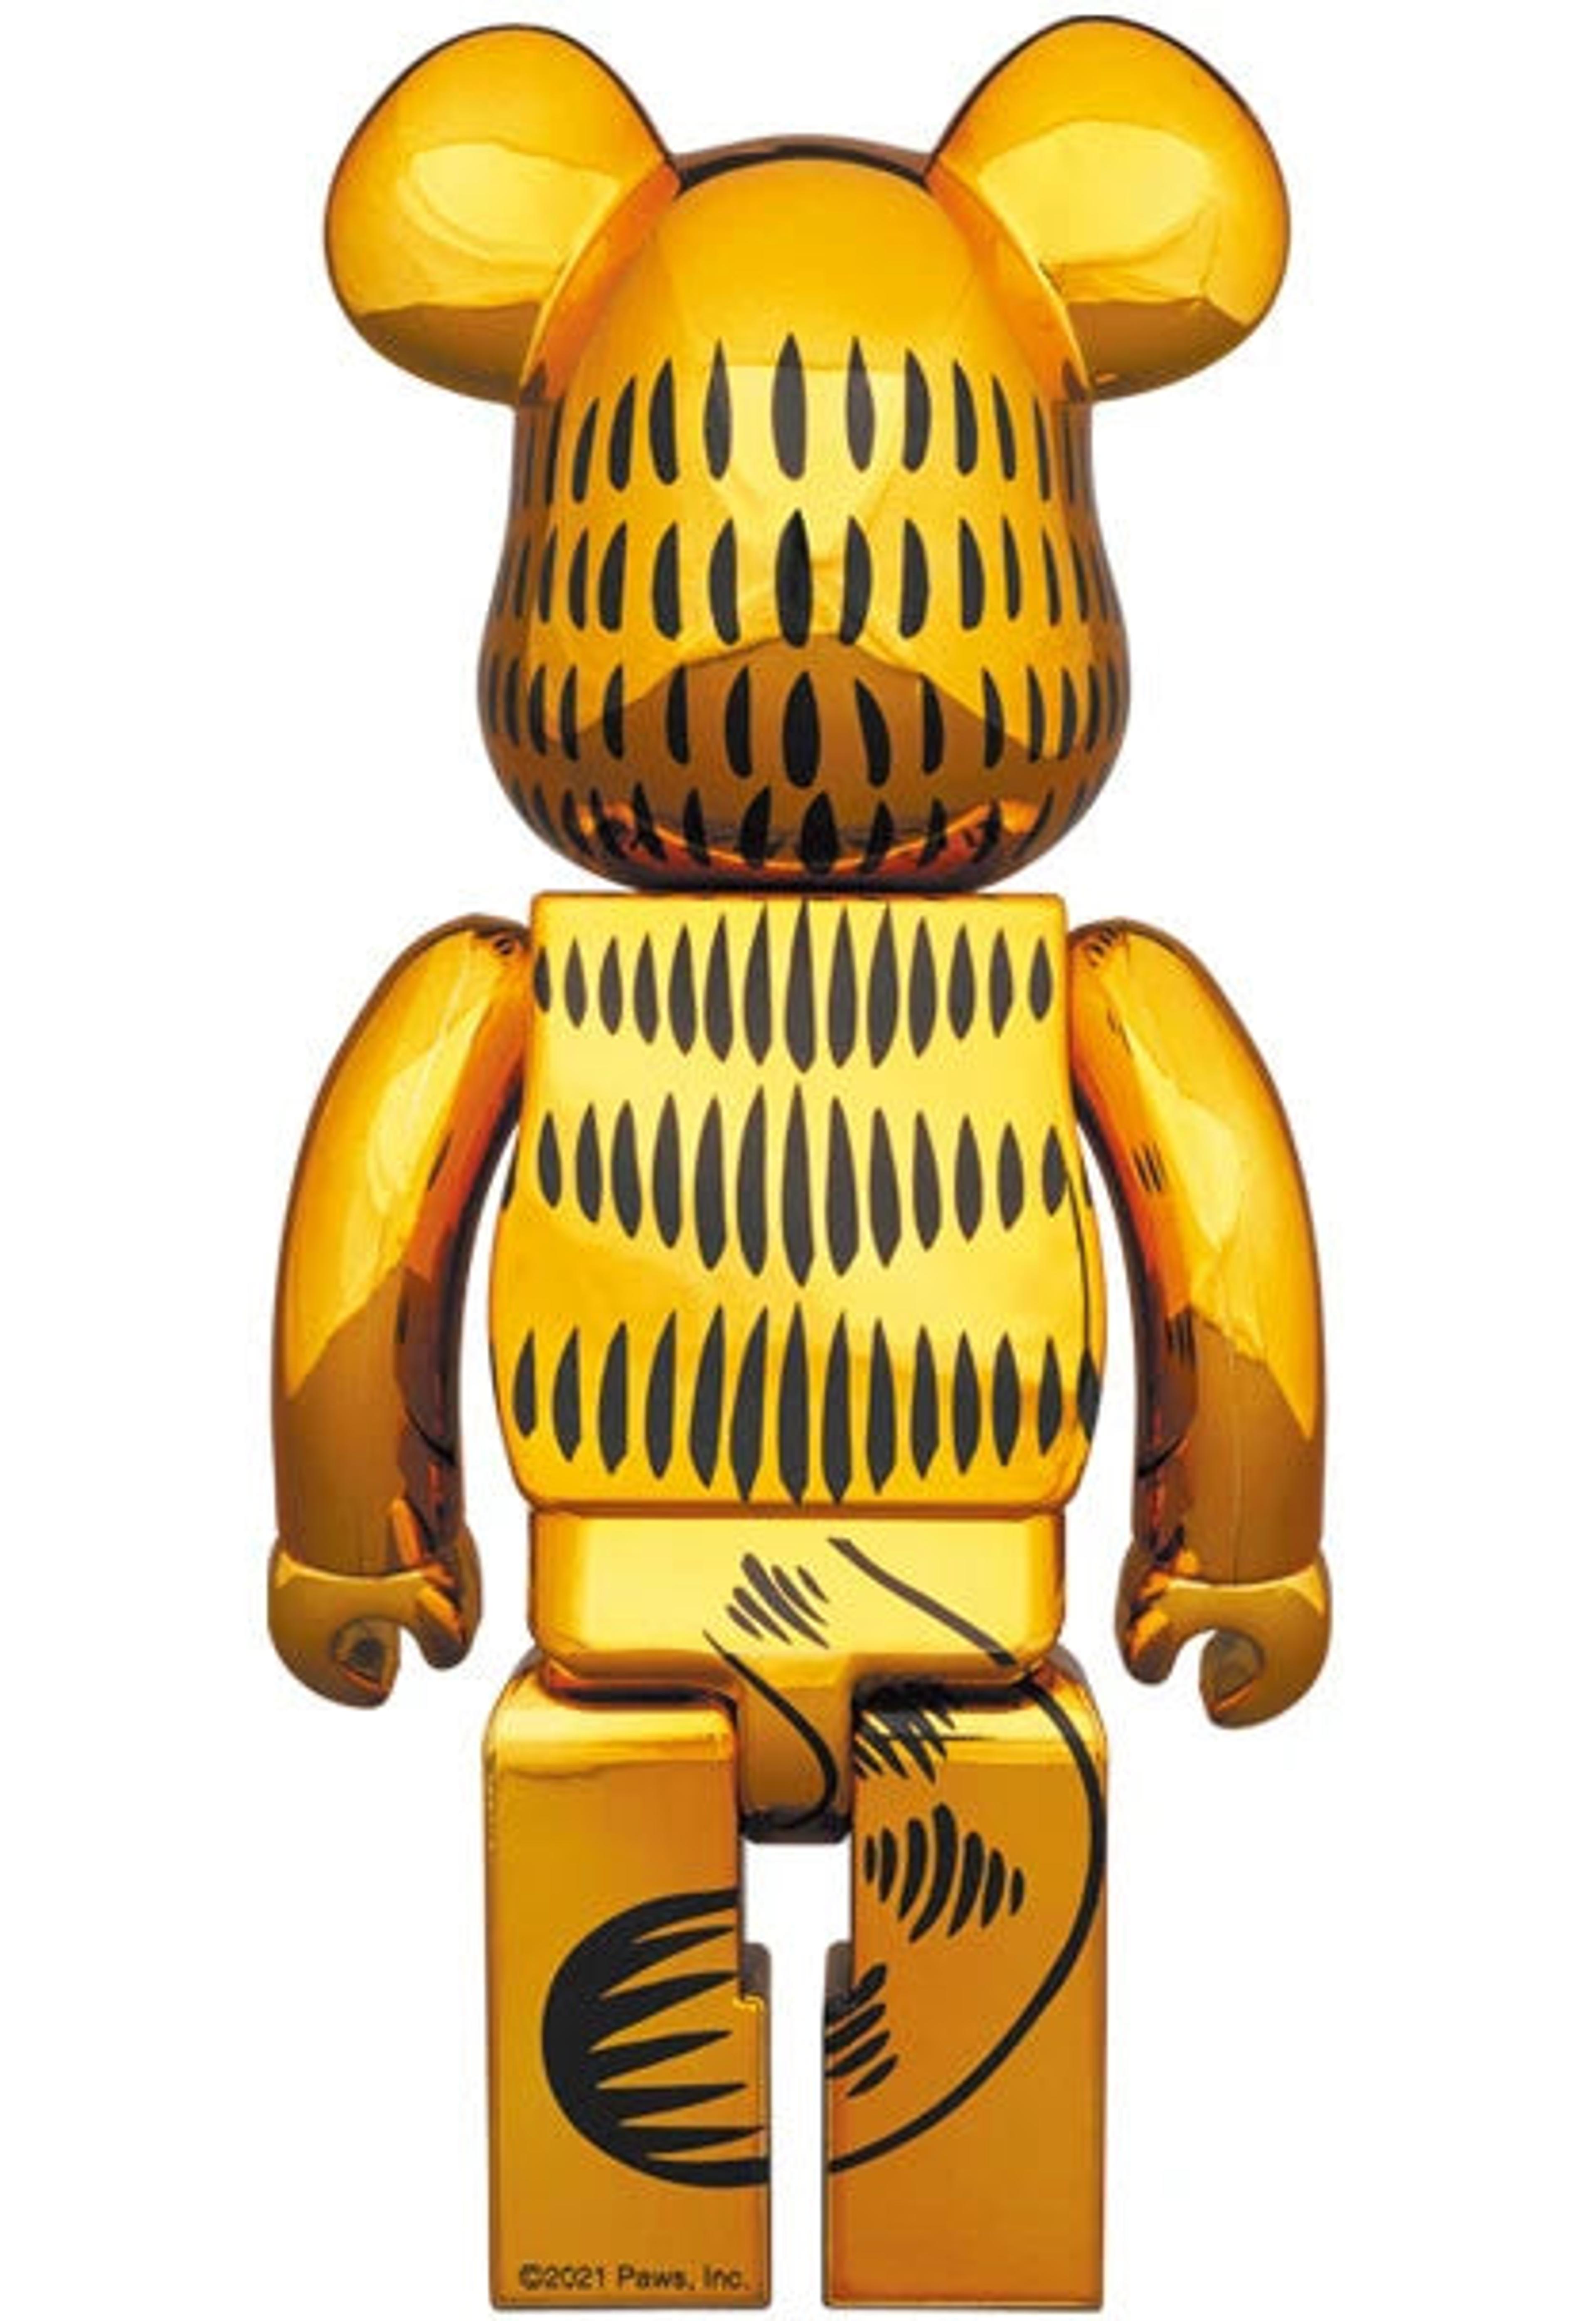 Alternate View 1 of BEARBRICK GARFIELD (GOLD CHROME VERSION) 100% AND 400%